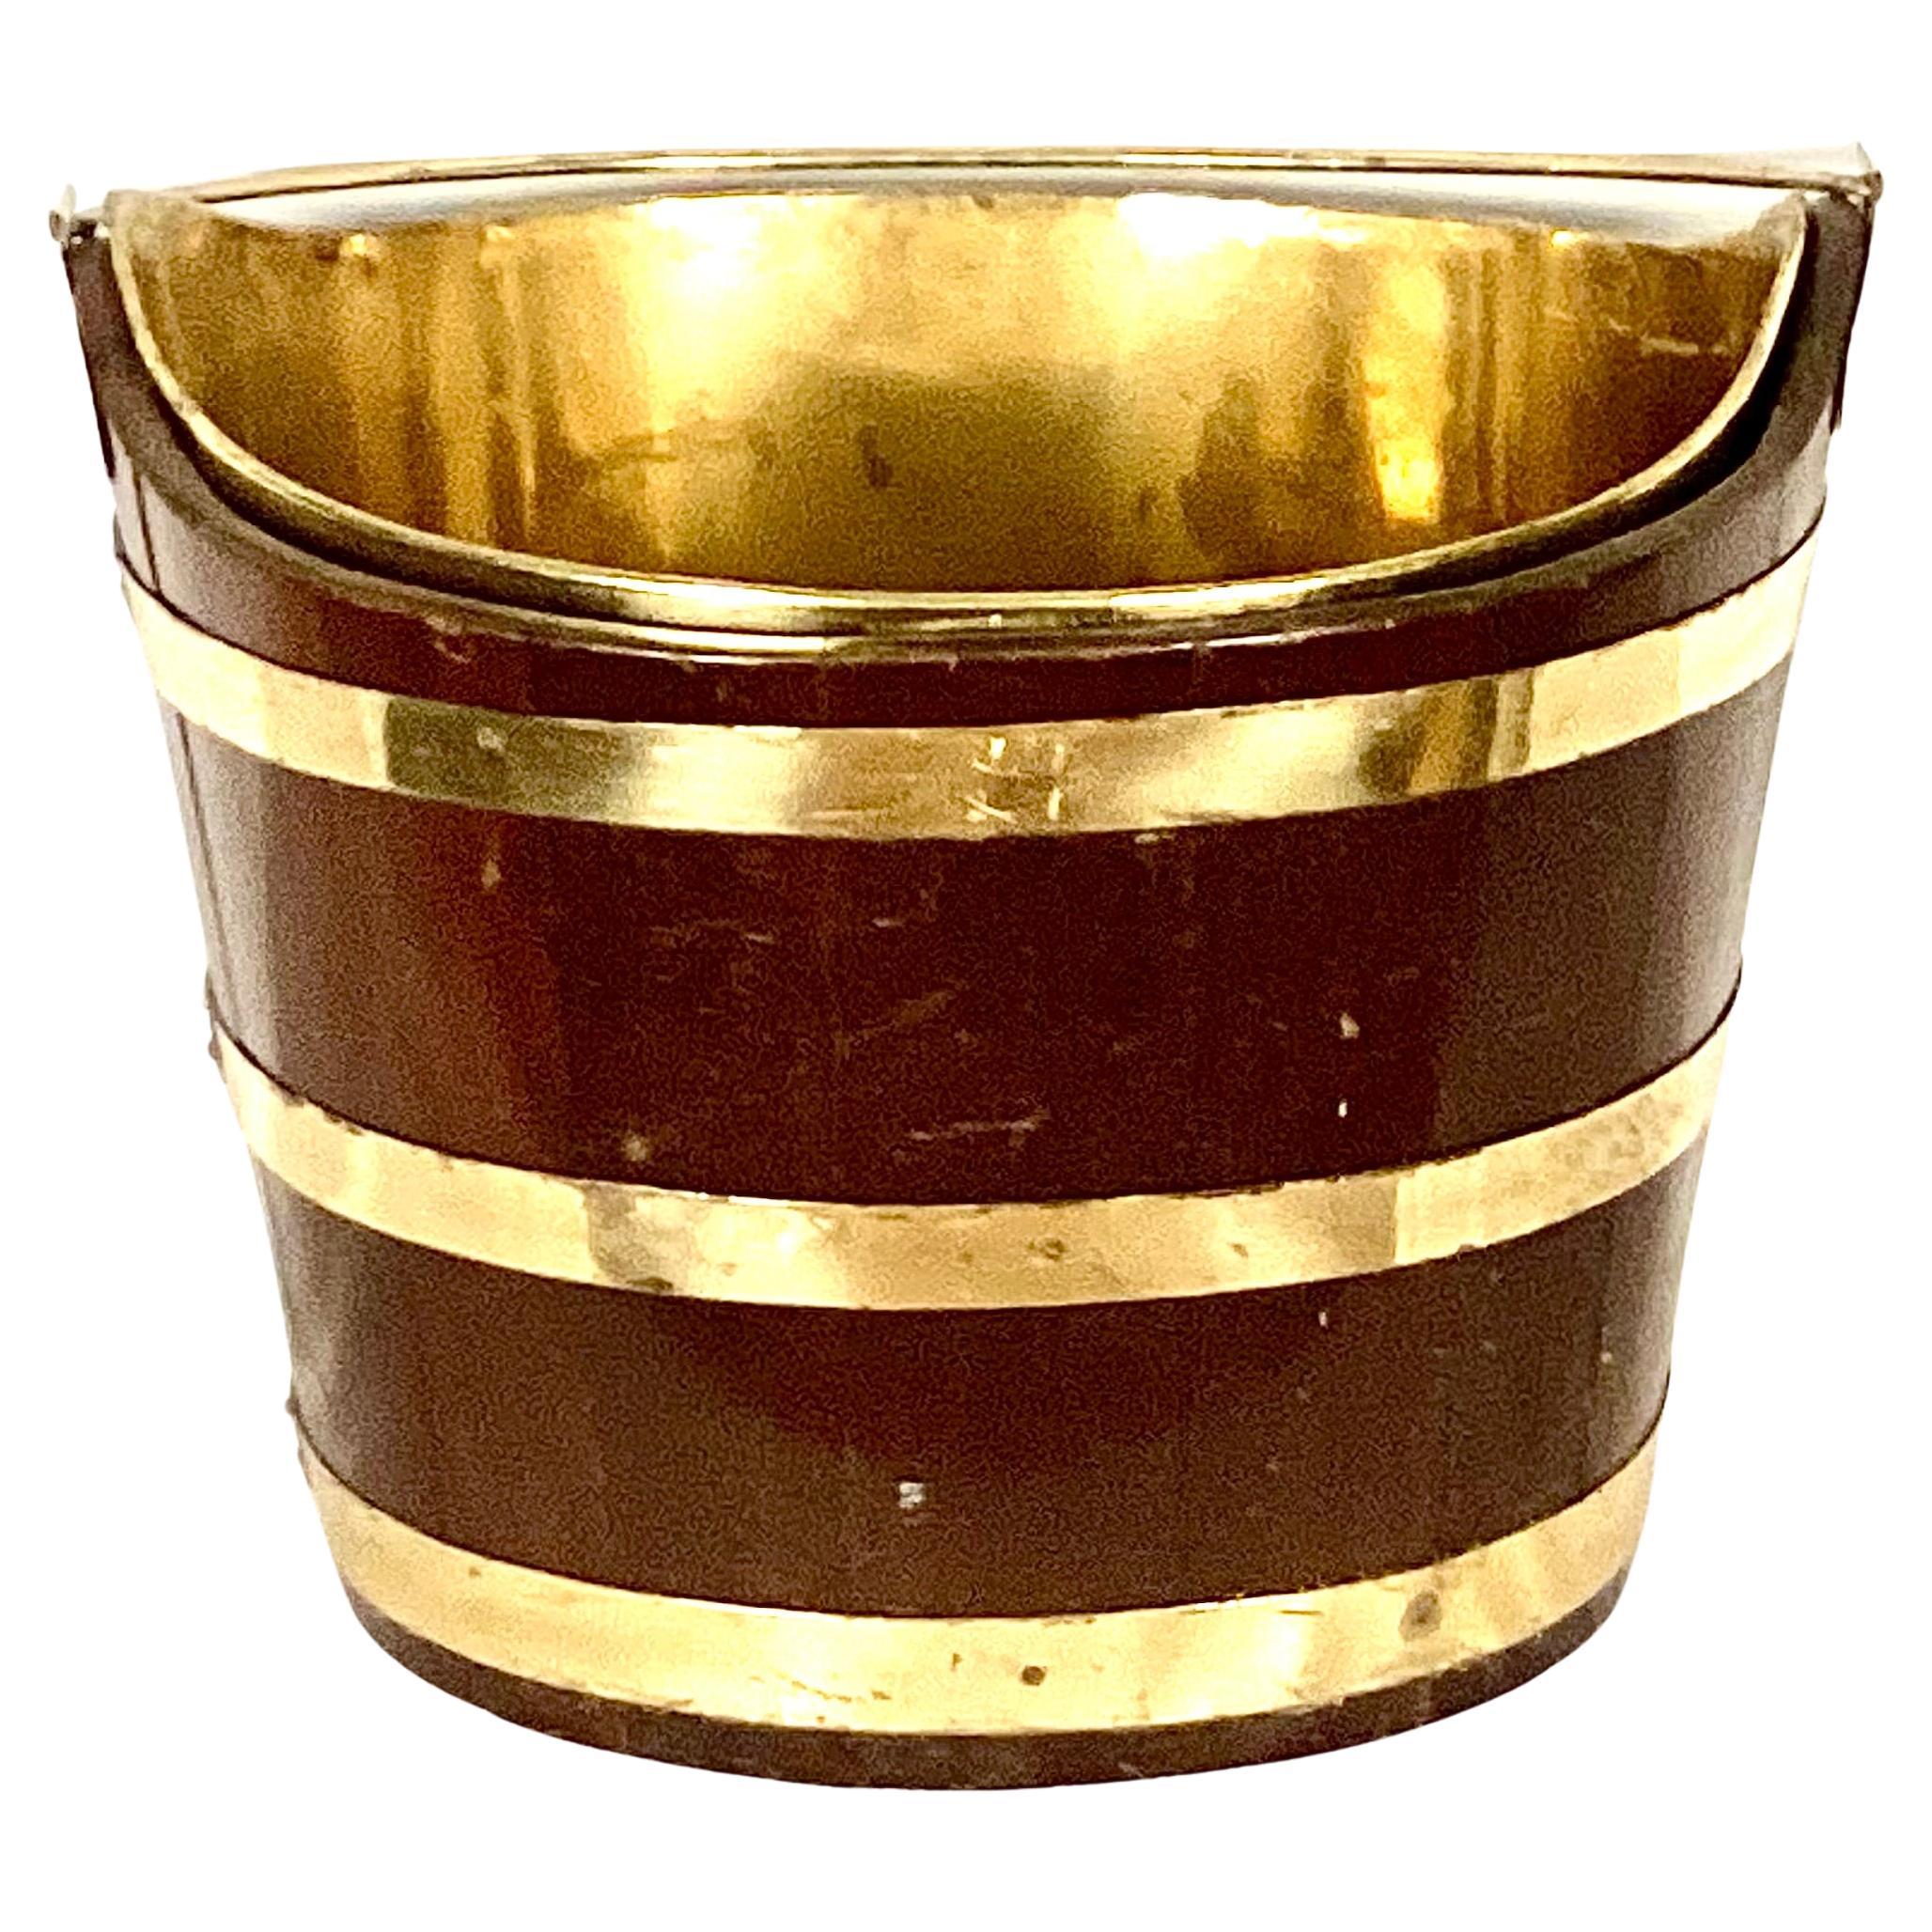 Large George III brass bound mahogany peat bucket. Bucket is on an oval shape and bound with three brass bands. The handle and removable liner are also brass. 